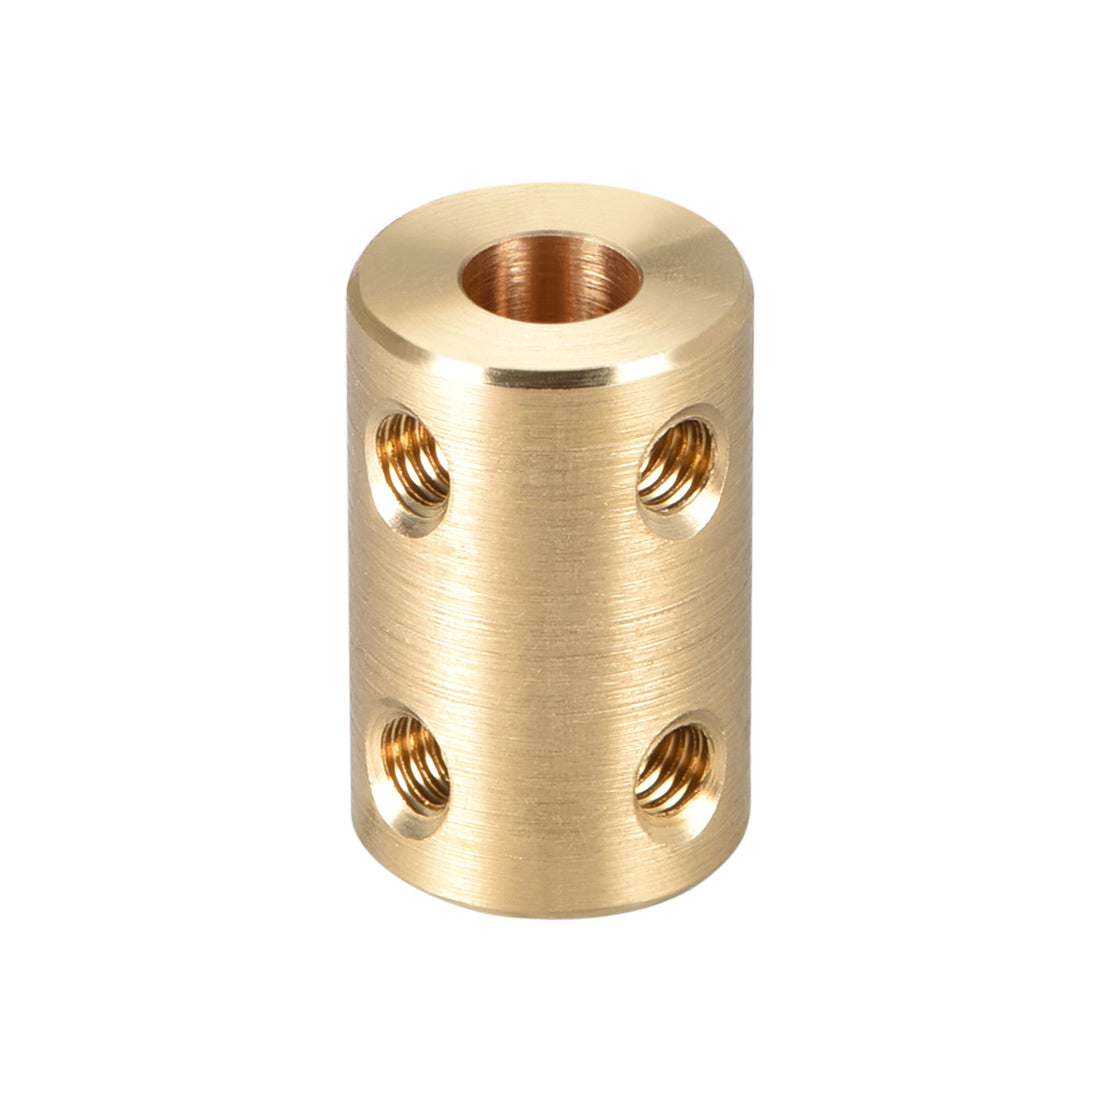 uxcell Uxcell Shaft Coupling 6mm to 6mm Bore L22xD14 Robot Motor Wheel Rigid Coupler Connector Gold Tone